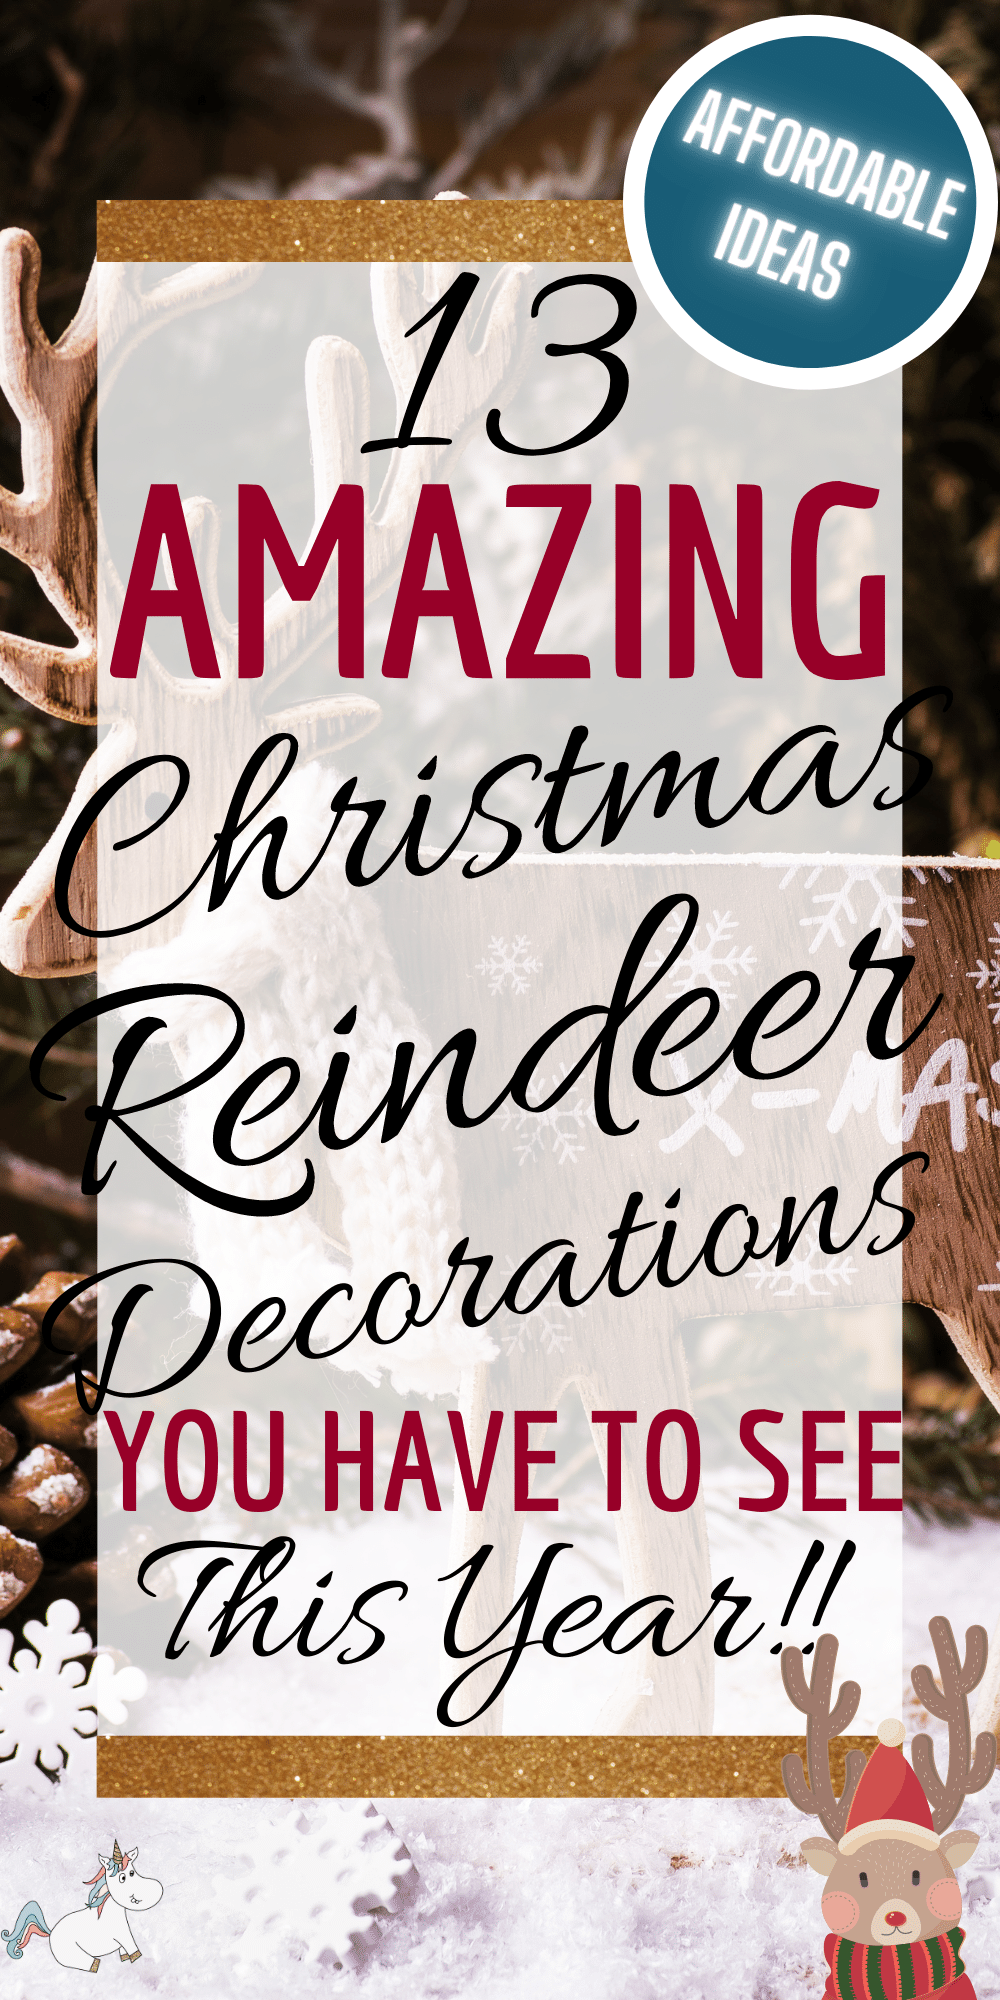 13 Amazing Reindeer Decorations That Are All Affordable, Festive, and Adorable! 